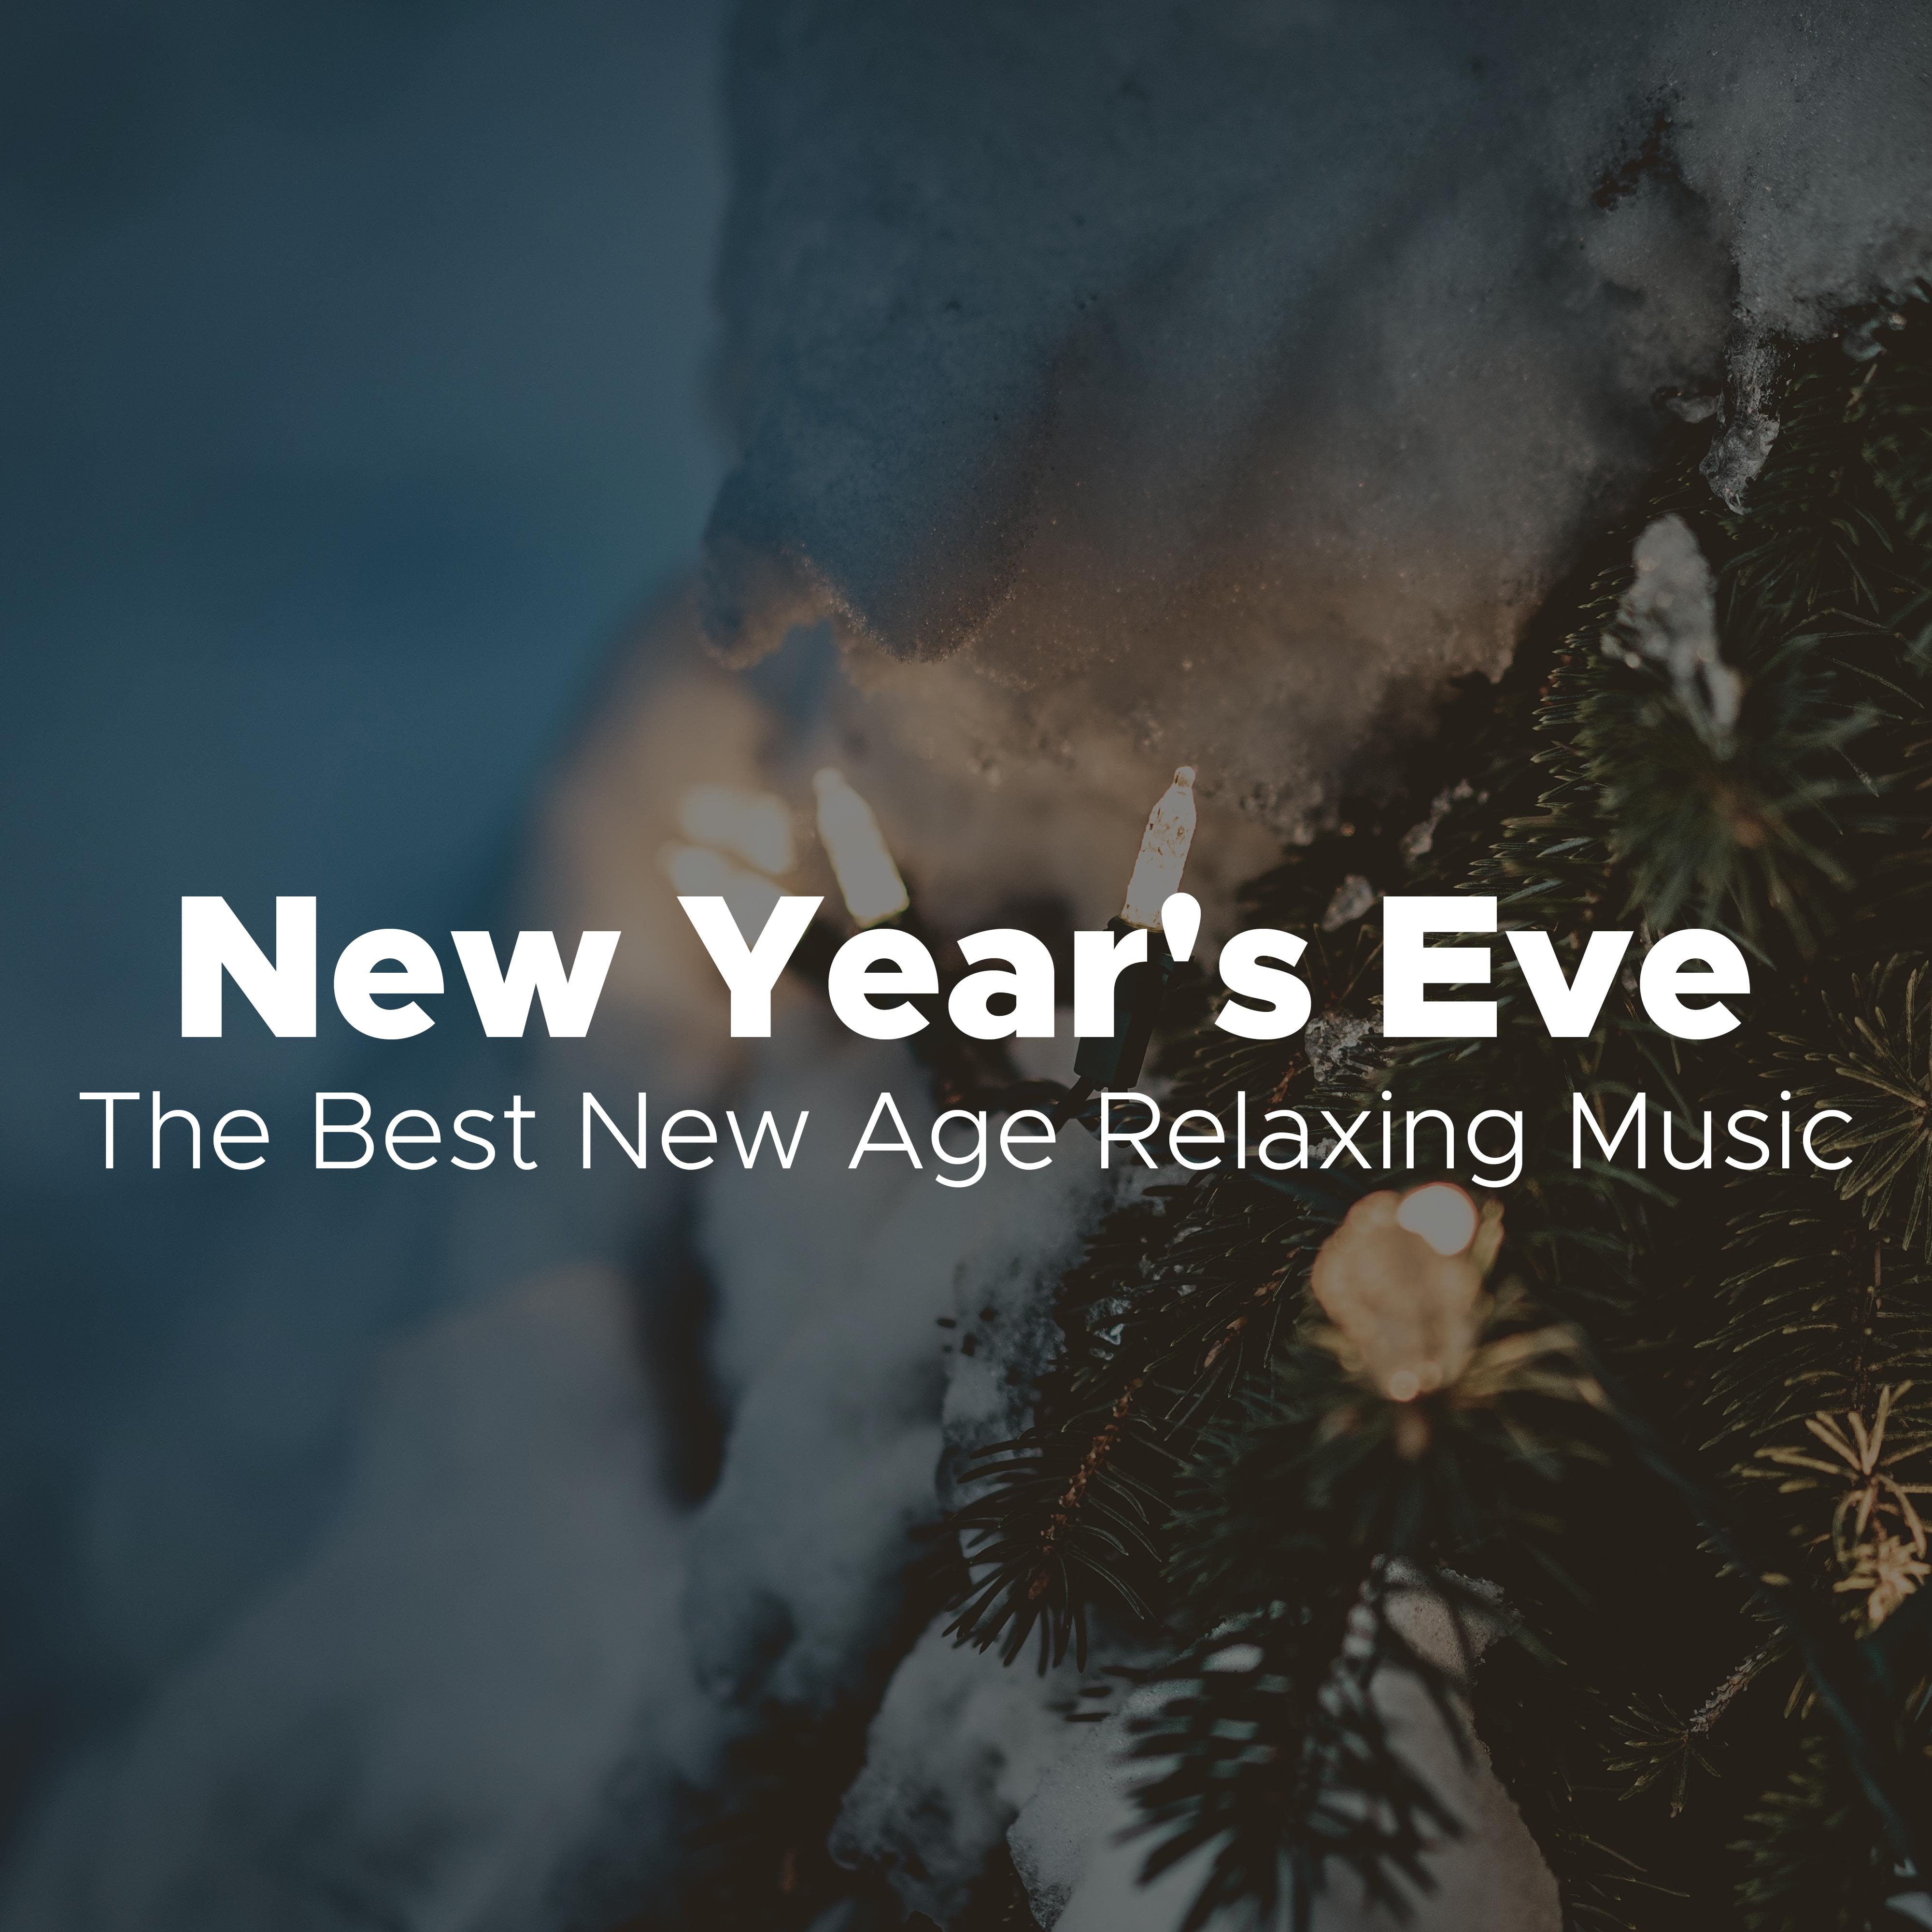 The Best New Age Relaxing Music to Celebrate New Year's Eve